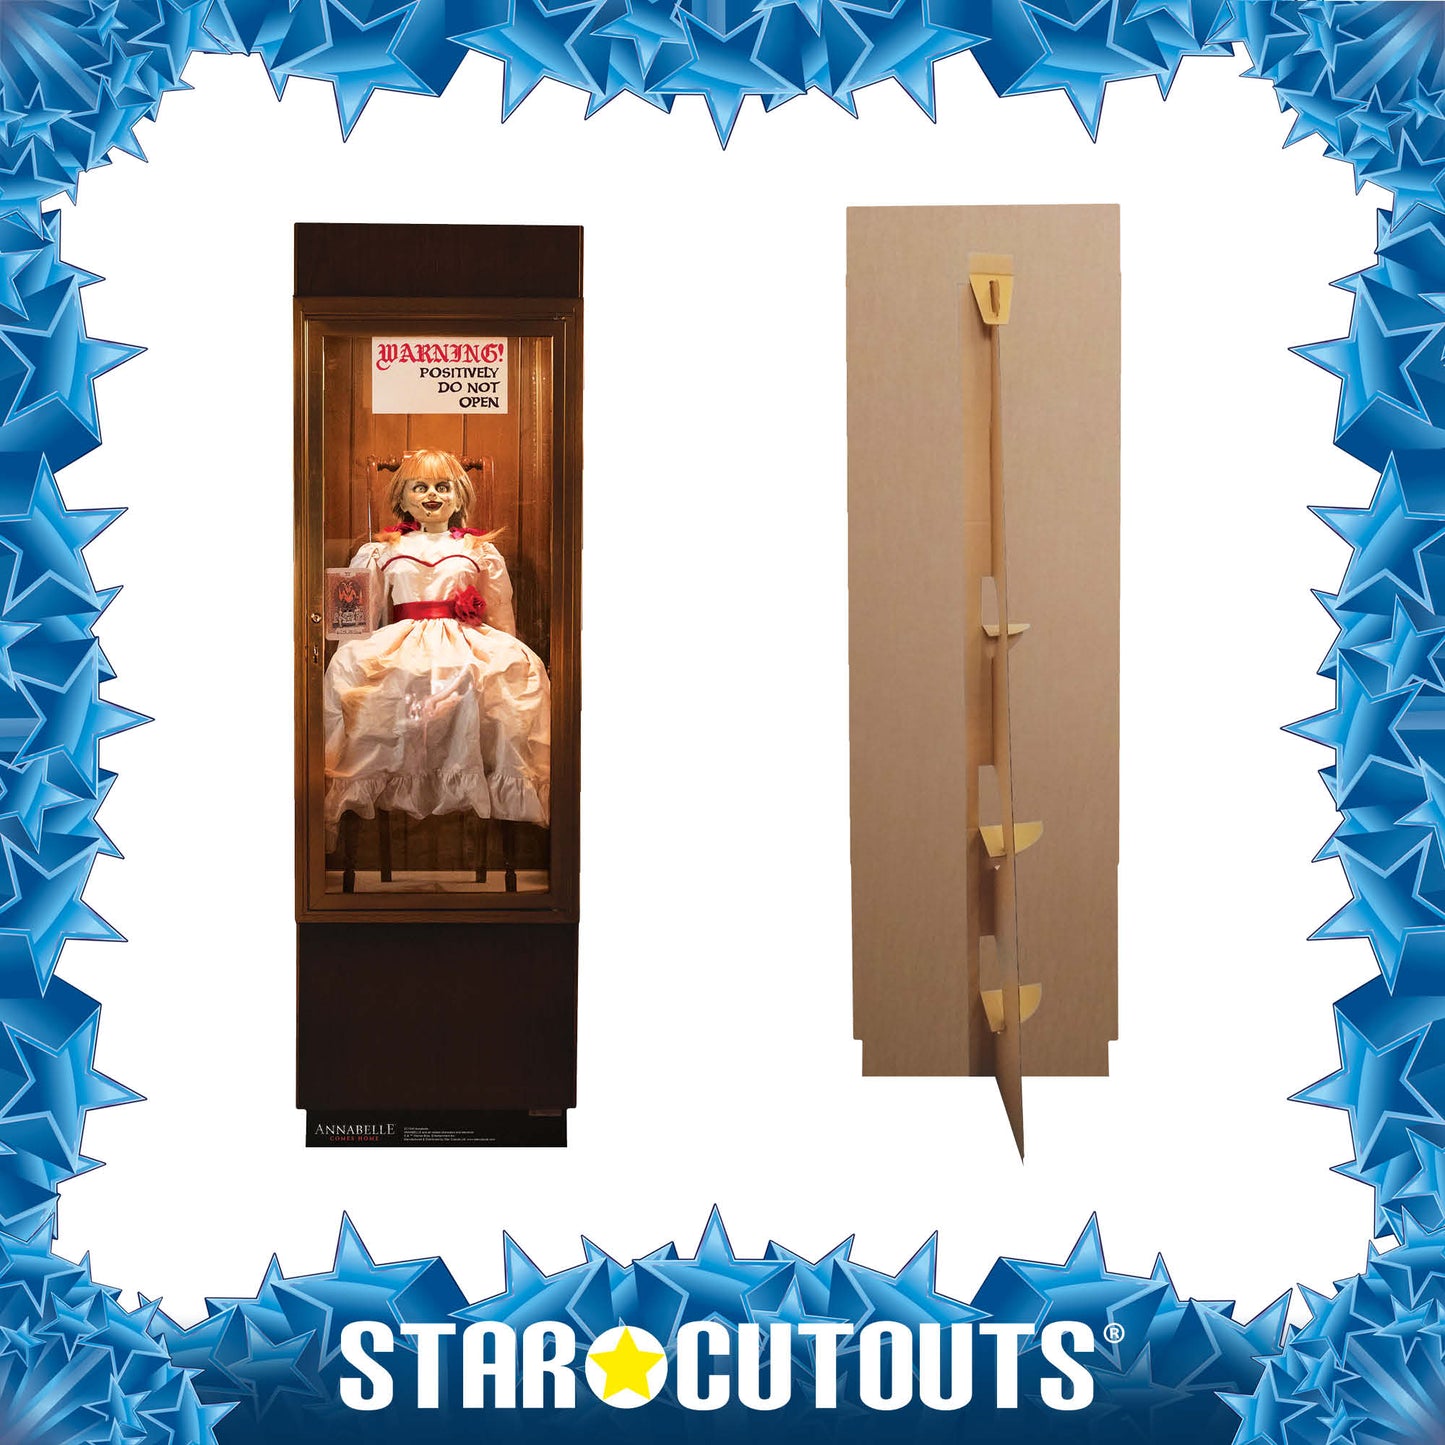 SC1540 Annabelle Possessed Doll Glass Case Cardboard Cut Out Height 177cm - Star Cutouts